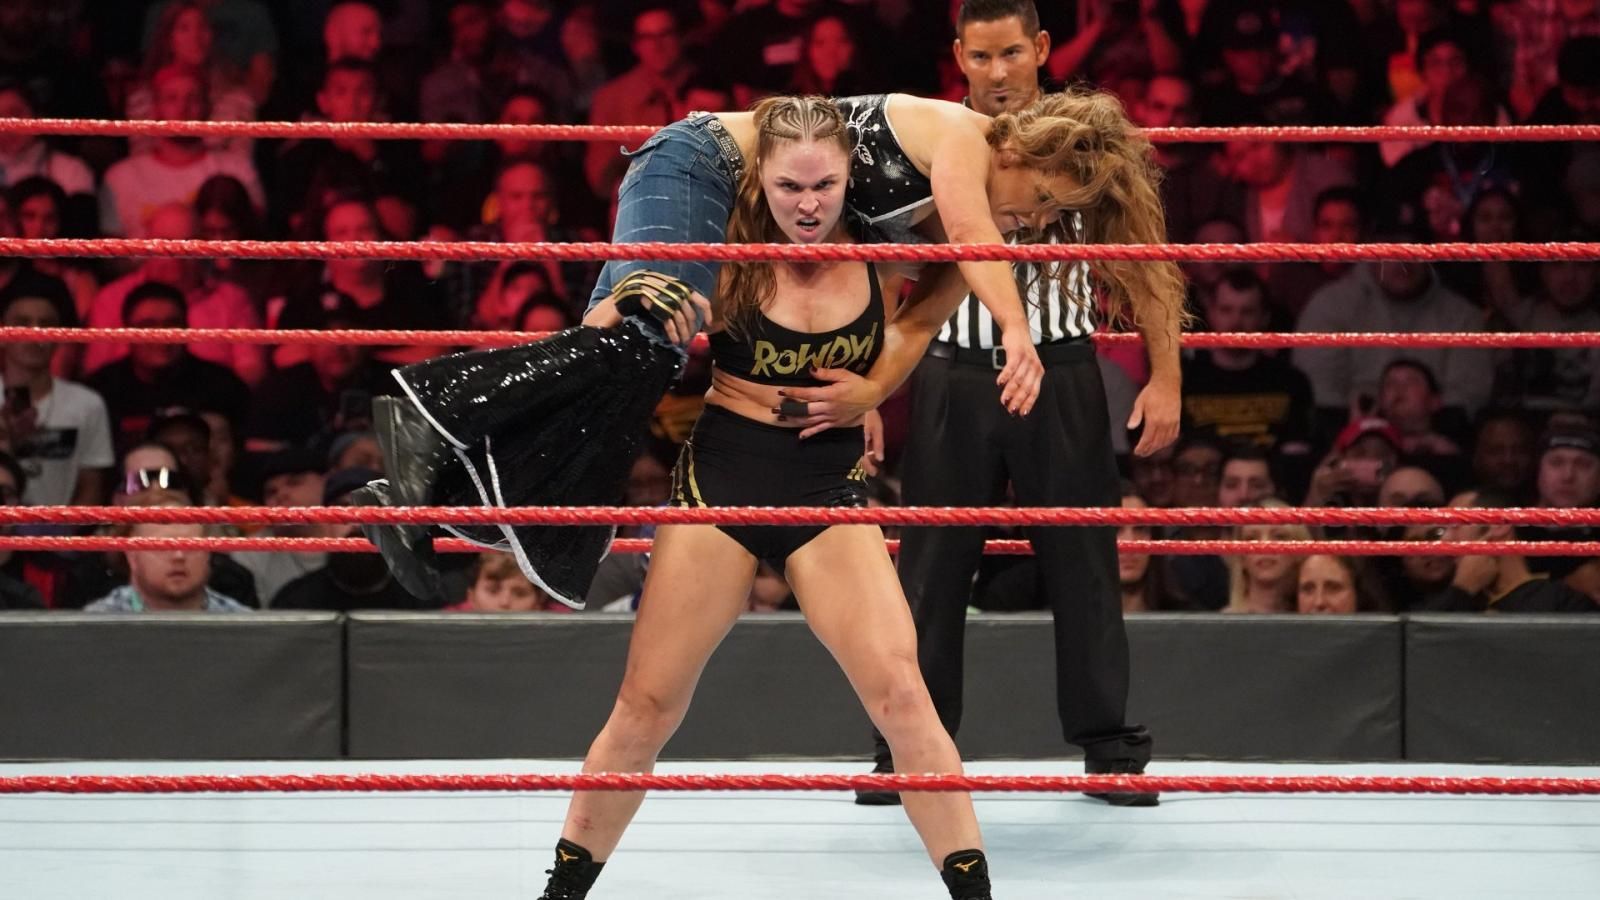 Ronda Rousey Hard Fuck Video - Ronda Rousey reveals the hardest part of being a WWE Superstar